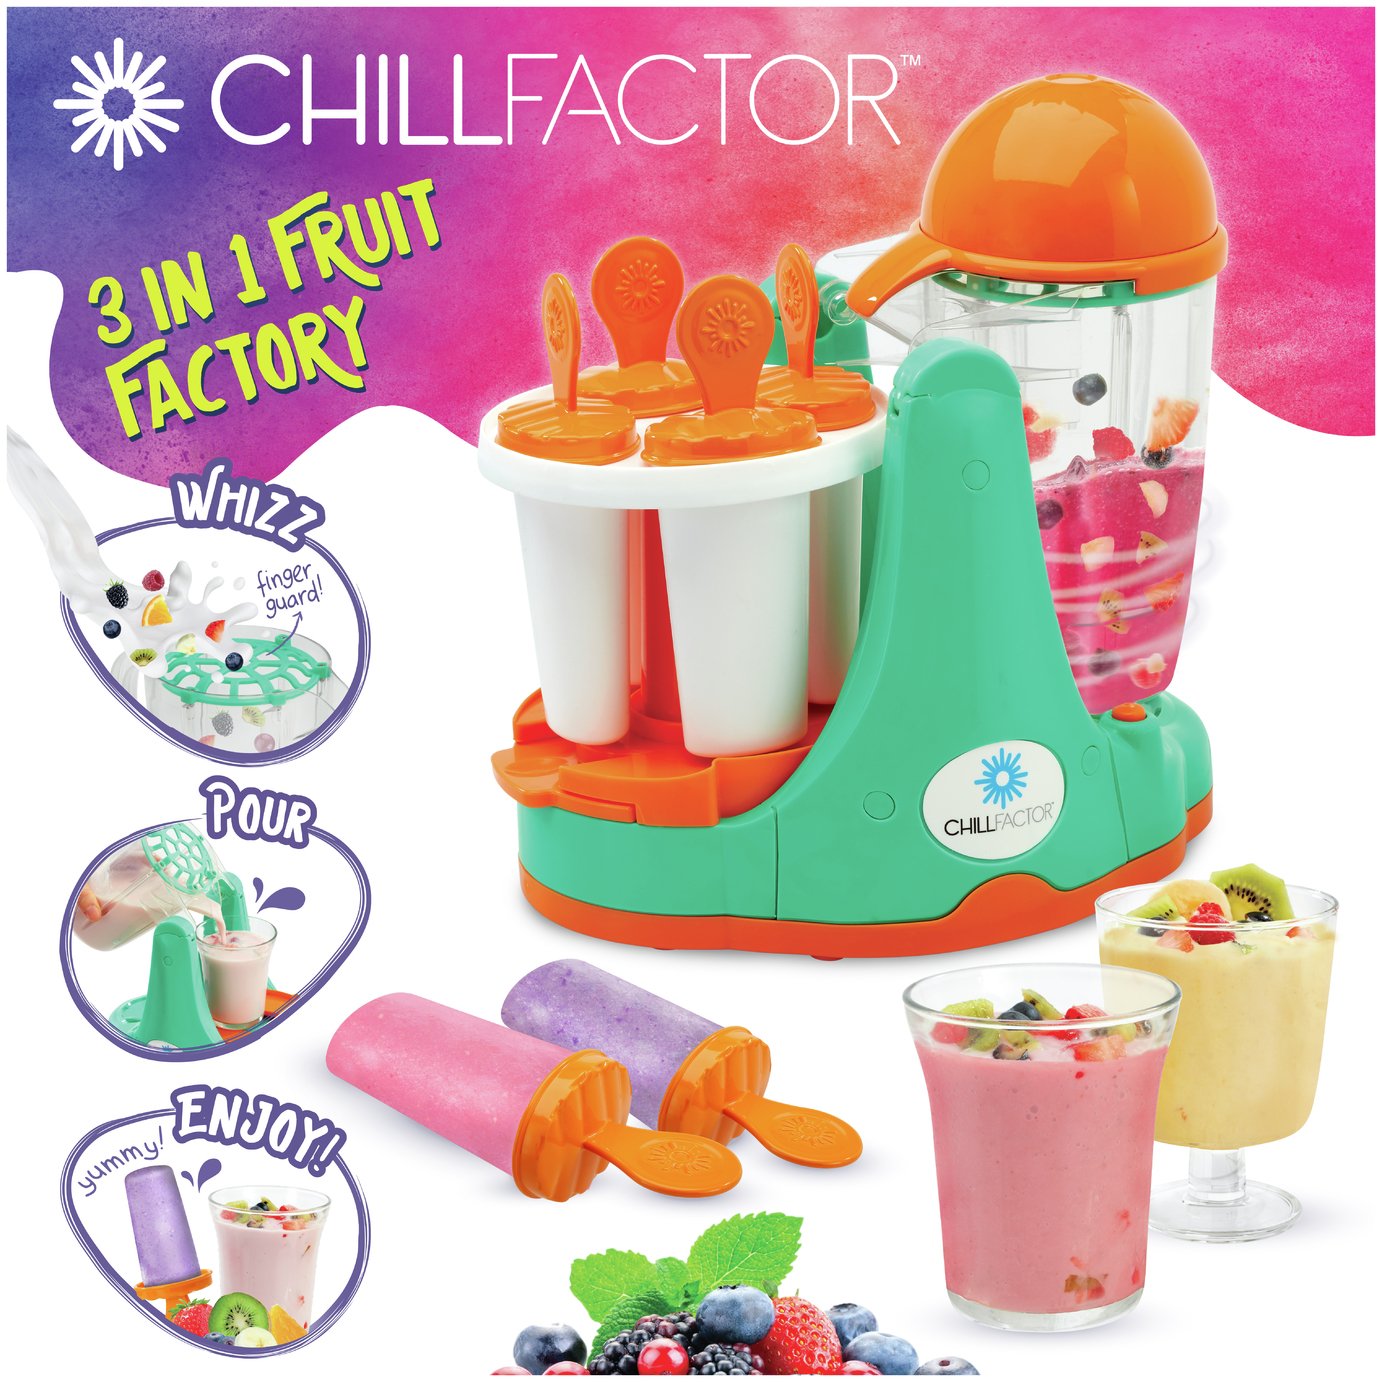 Chill Factor 3 in 1 Fruit Factory